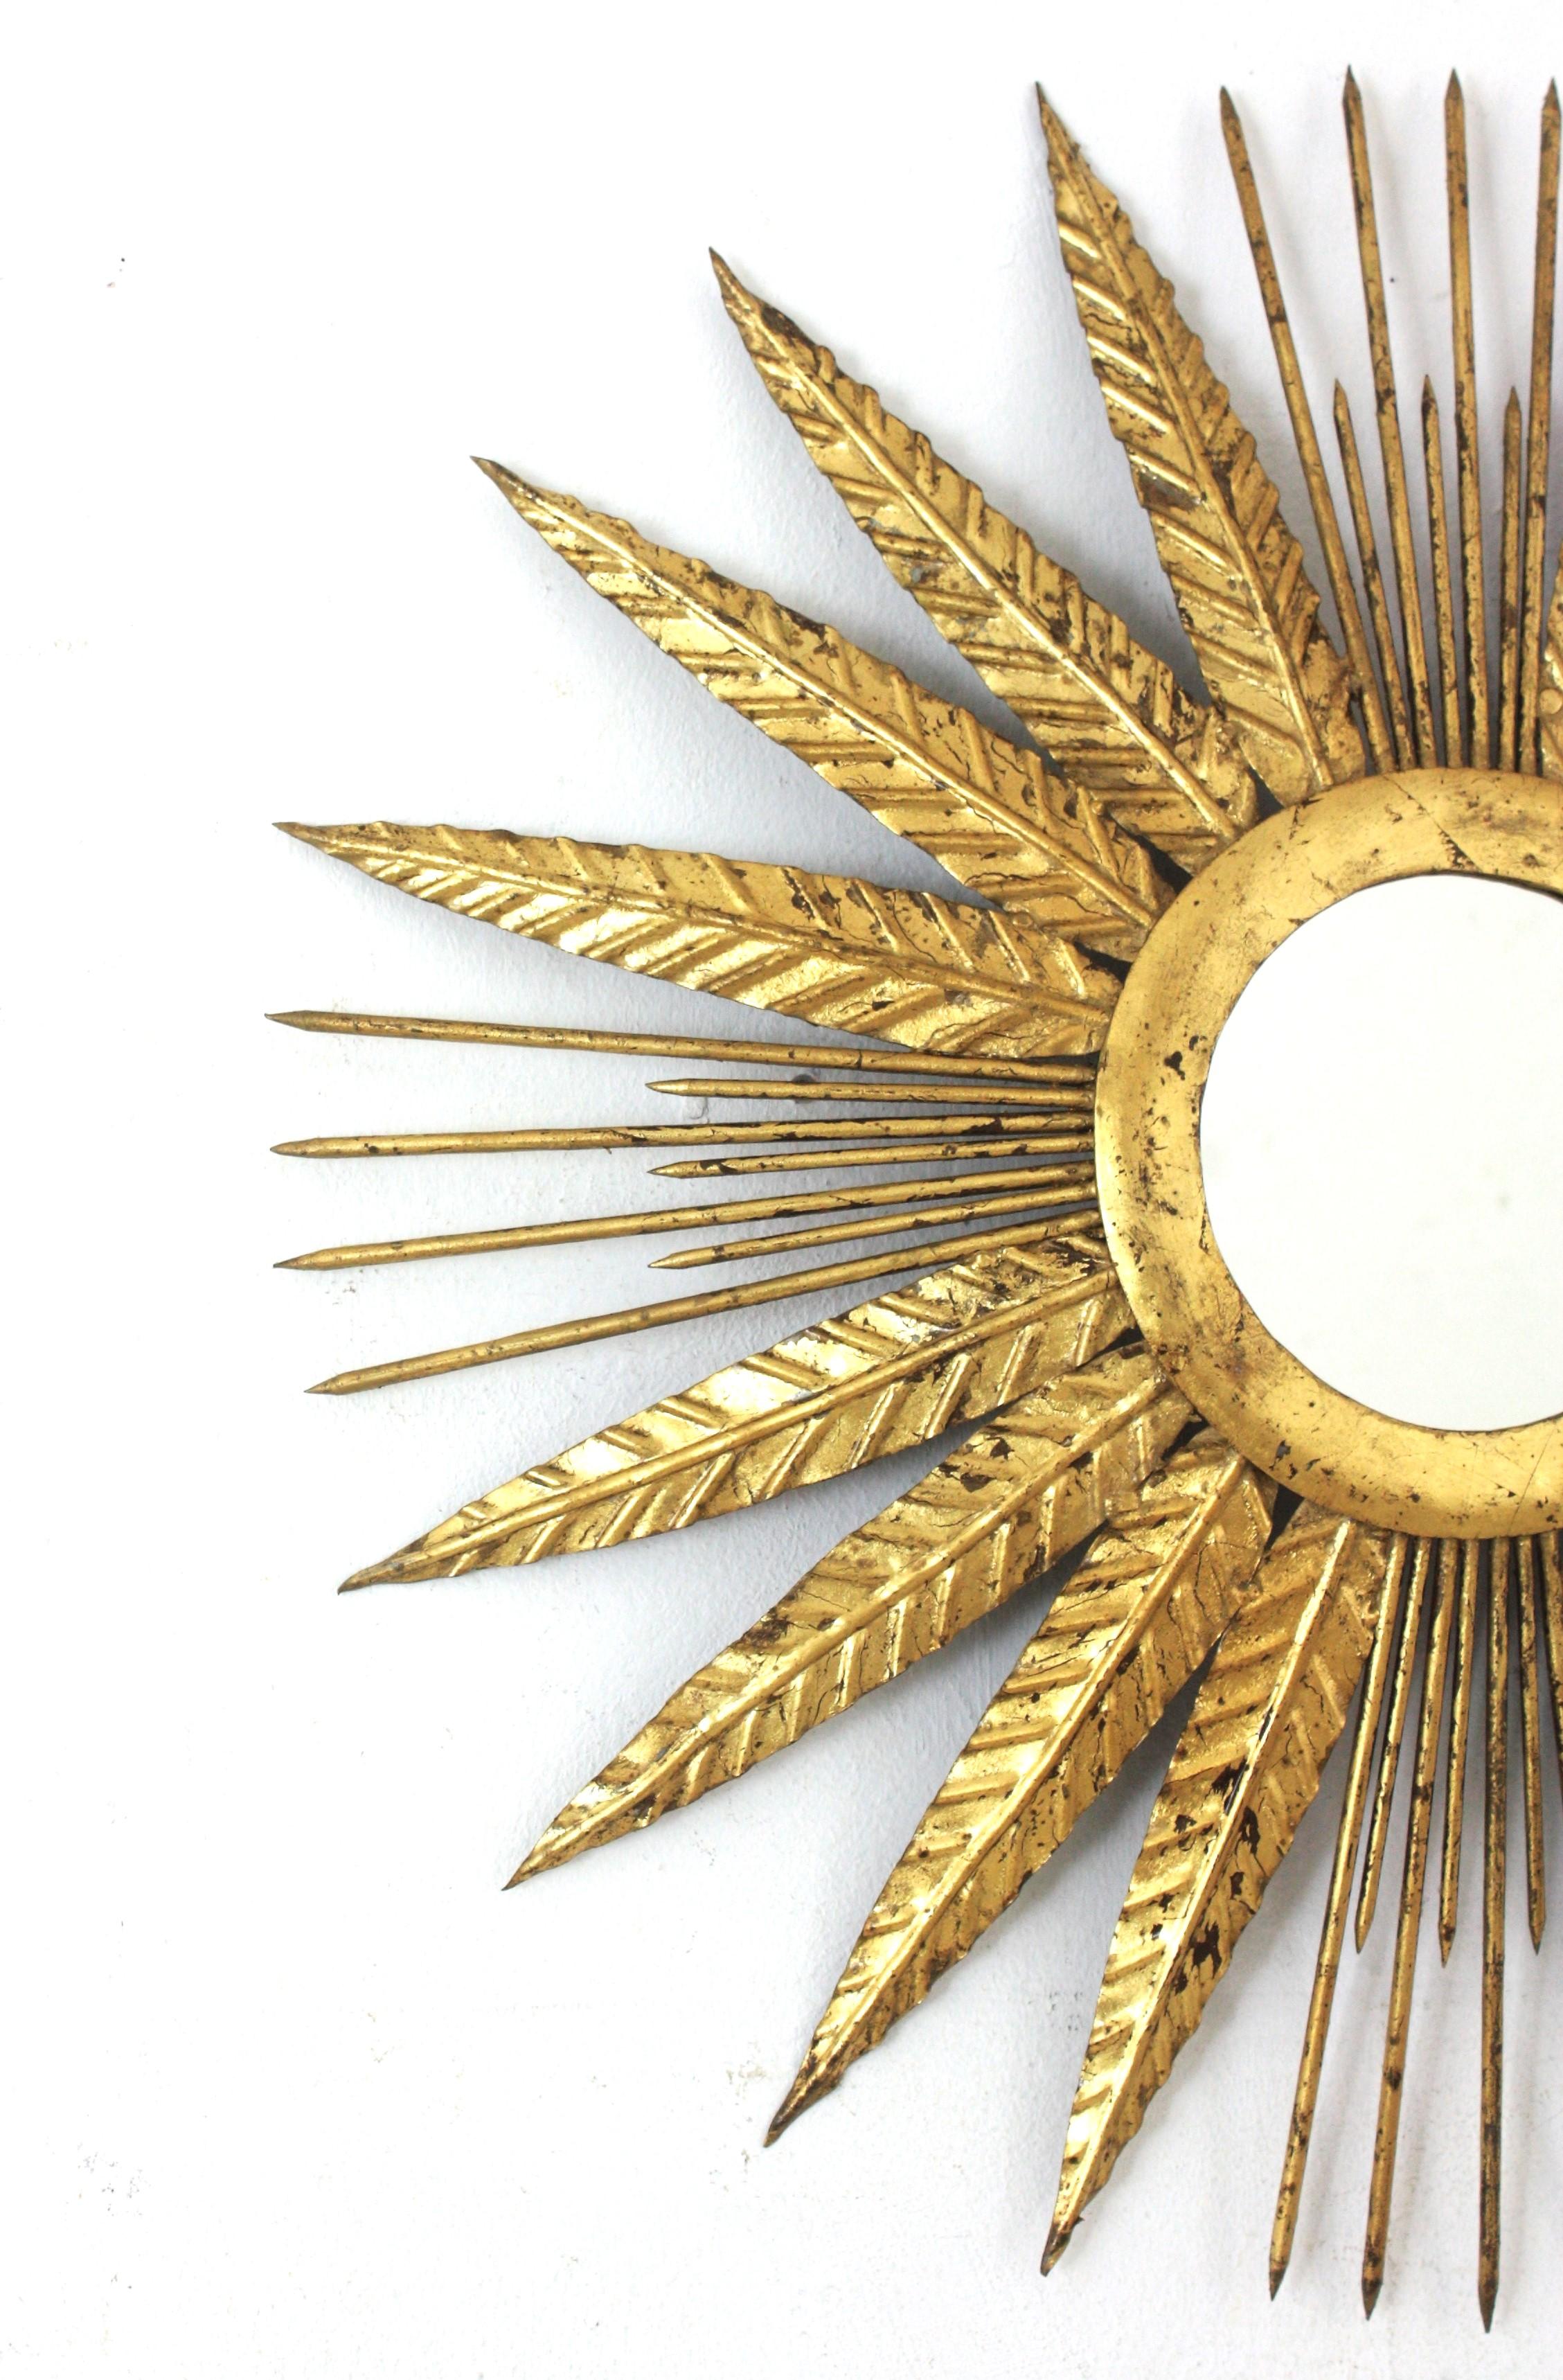 20th Century French Sunburst Mirror in Gilt Iron with Spikey Leafed Frame, 1940s For Sale